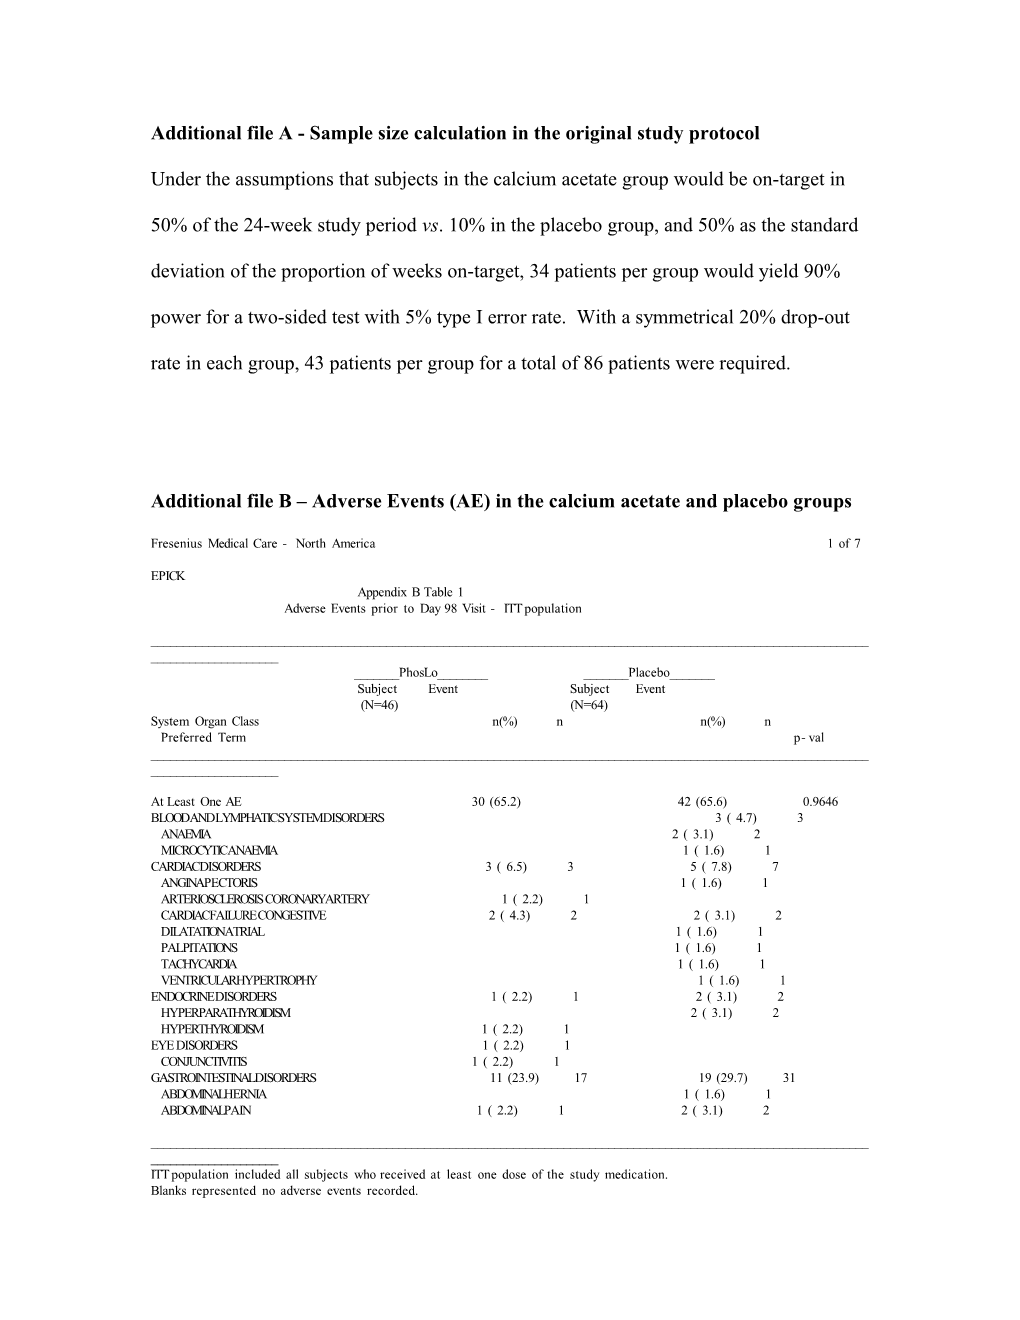 Additional File a - Sample Size Calculation in the Original Study Protocol